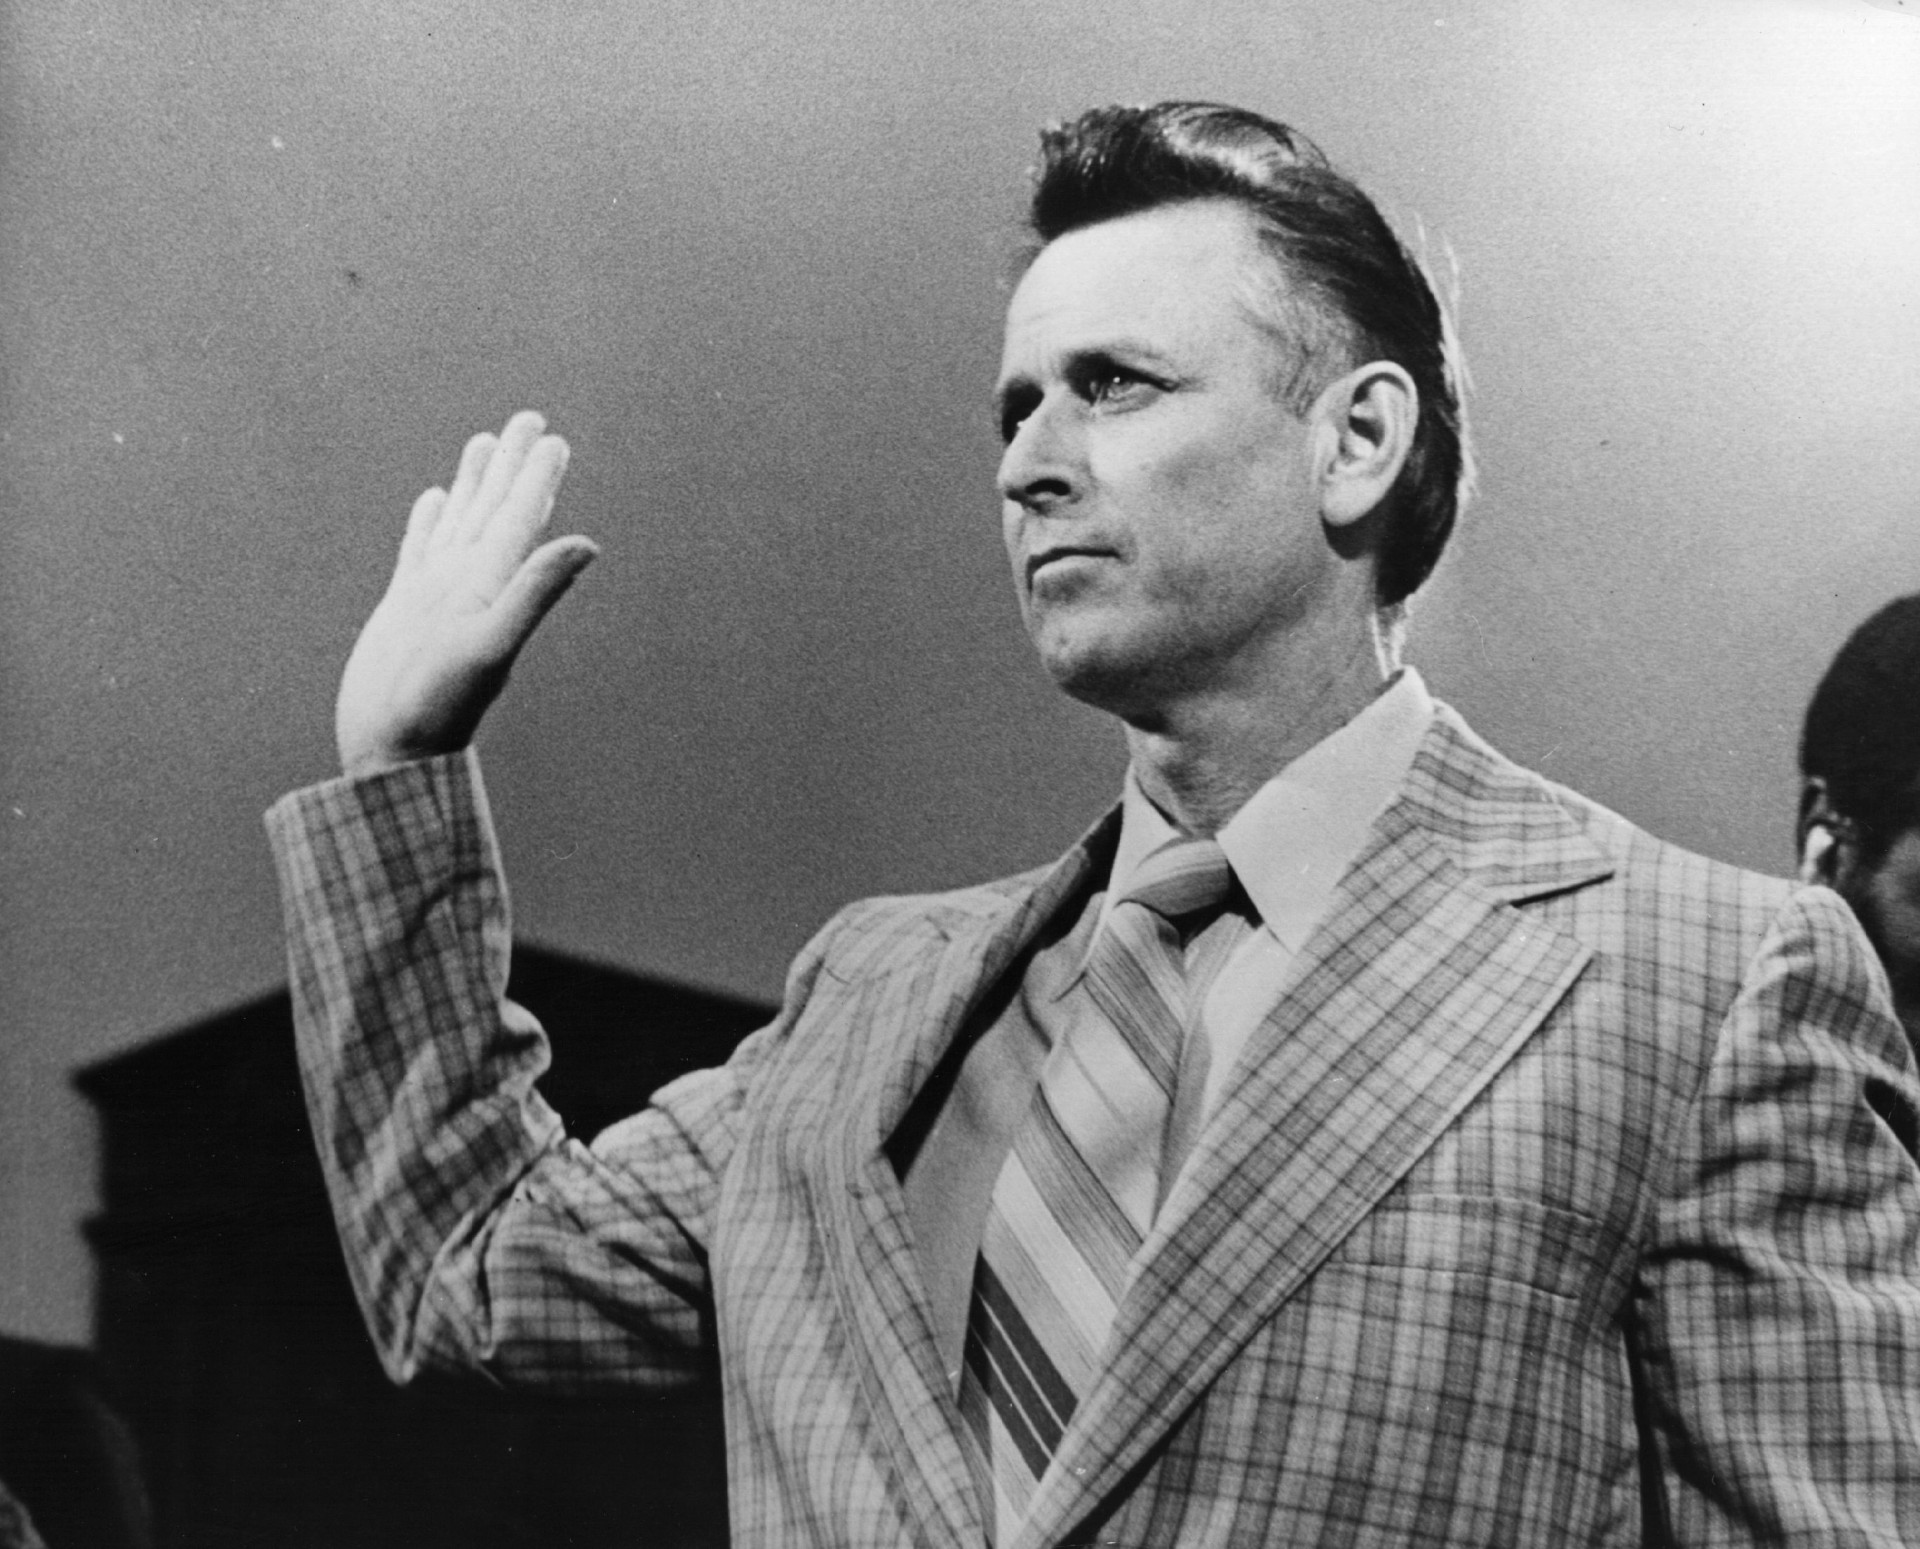 The gunman, James Earl Ray, was convicted in 1969 of King's murder, and sentenced to 99 years in jail. He died in prison in 1998.<p><a href="https://www.msn.com/en-us/community/channel/vid-7xx8mnucu55yw63we9va2gwr7uihbxwc68fxqp25x6tg4ftibpra?cvid=94631541bc0f4f89bfd59158d696ad7e">Follow us and access great exclusive content every day</a></p>